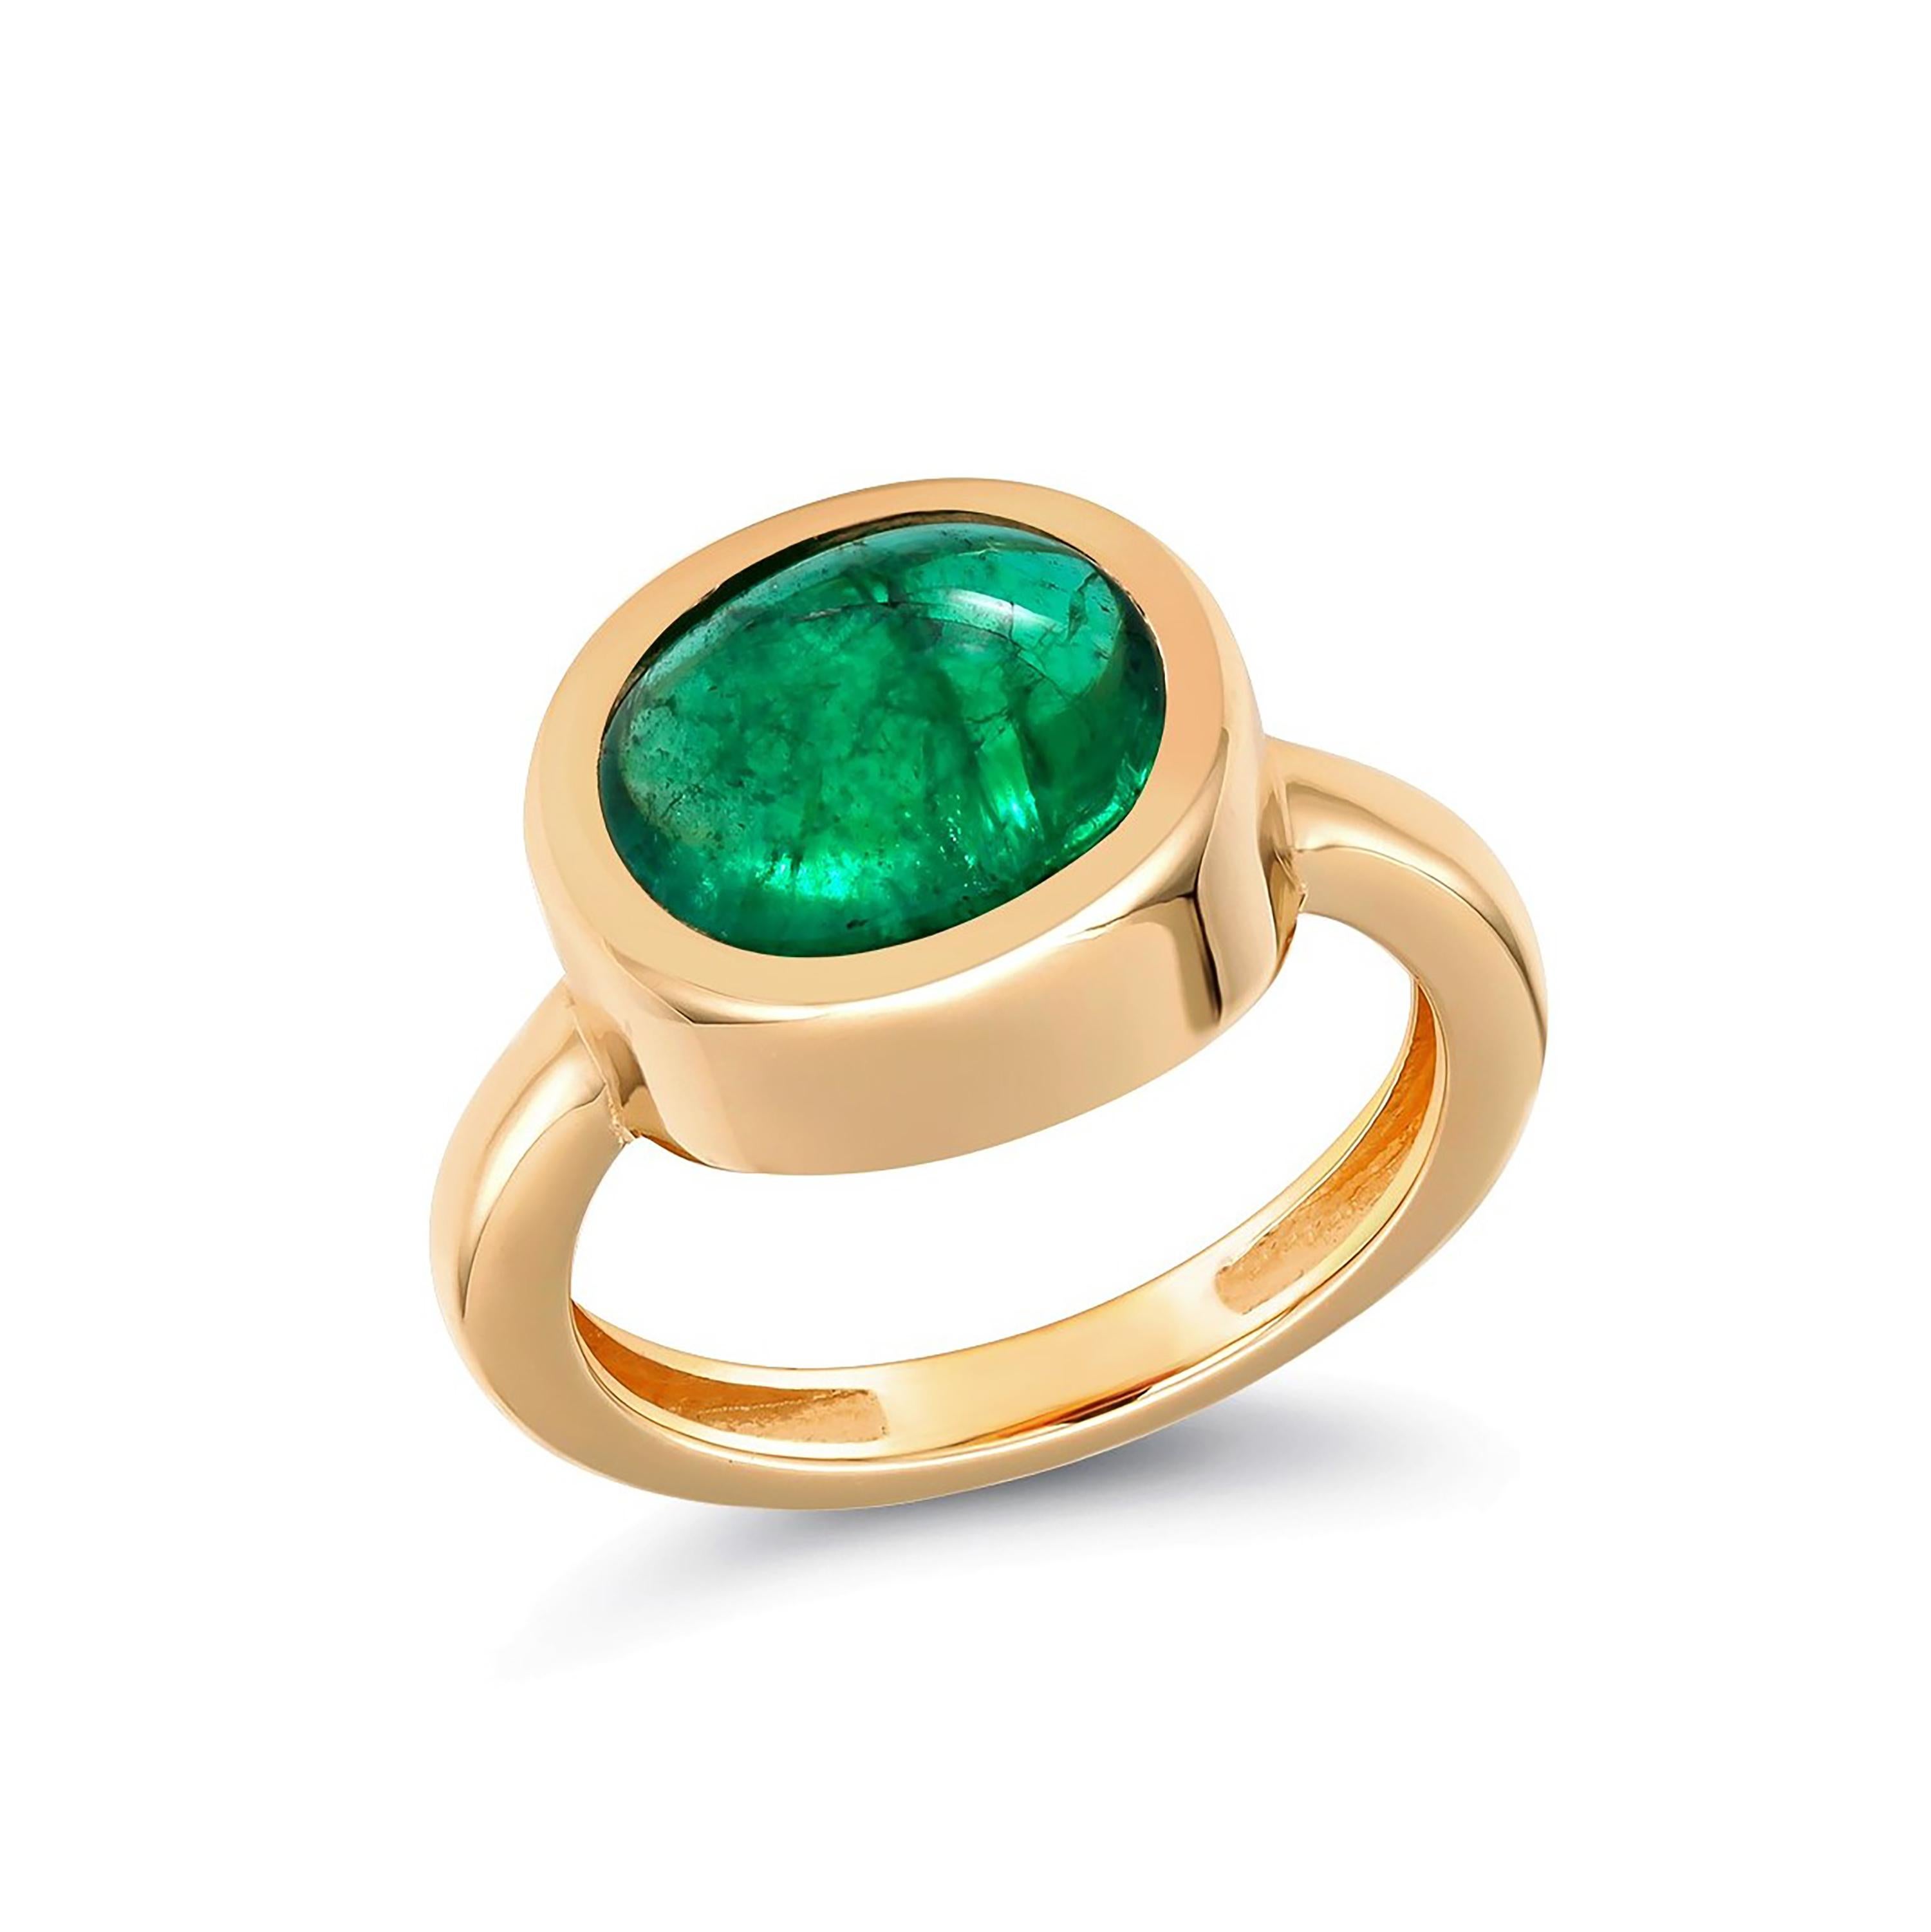 Oval Cut Cabochon Emerald High Dome Yellow Gold Cocktail Solitaire Ring